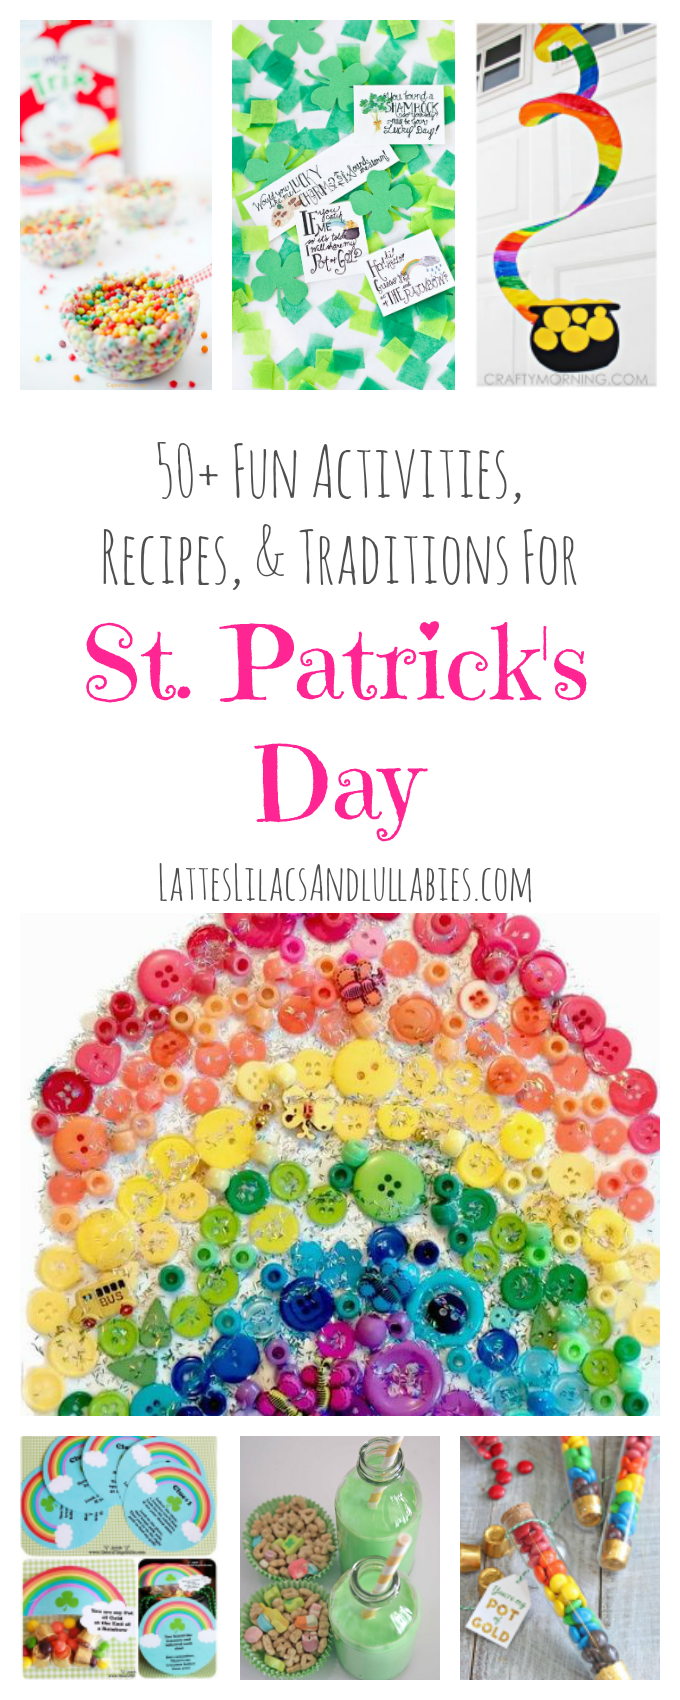 Are you searching for unique, fun, and exciting ideas for St. Patrick's Day?  Well, you've come to the right place...